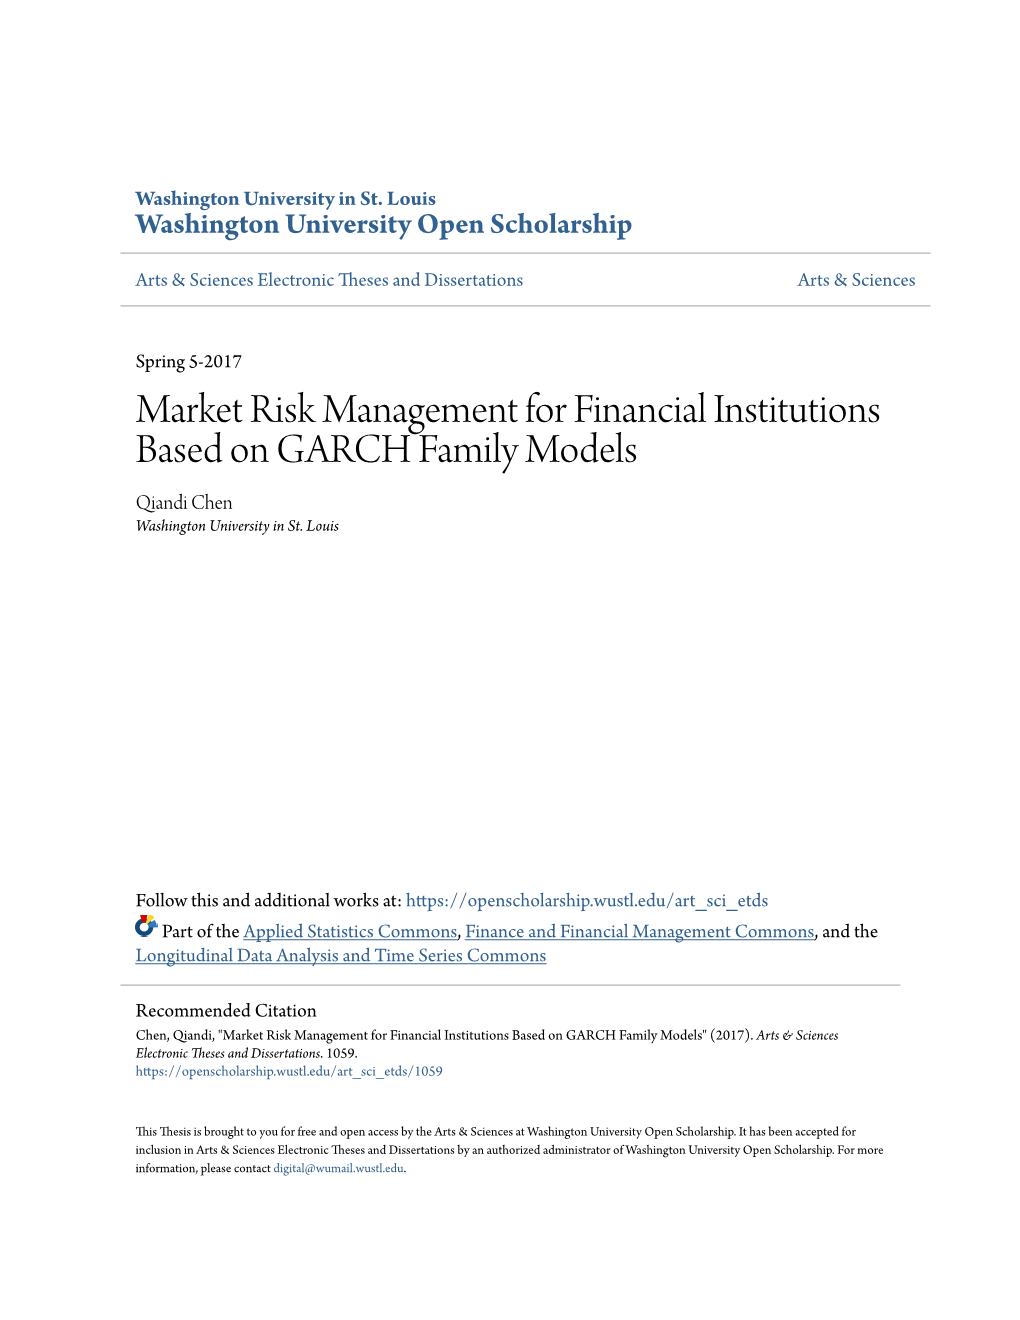 Market Risk Management for Financial Institutions Based on GARCH Family Models Qiandi Chen Washington University in St